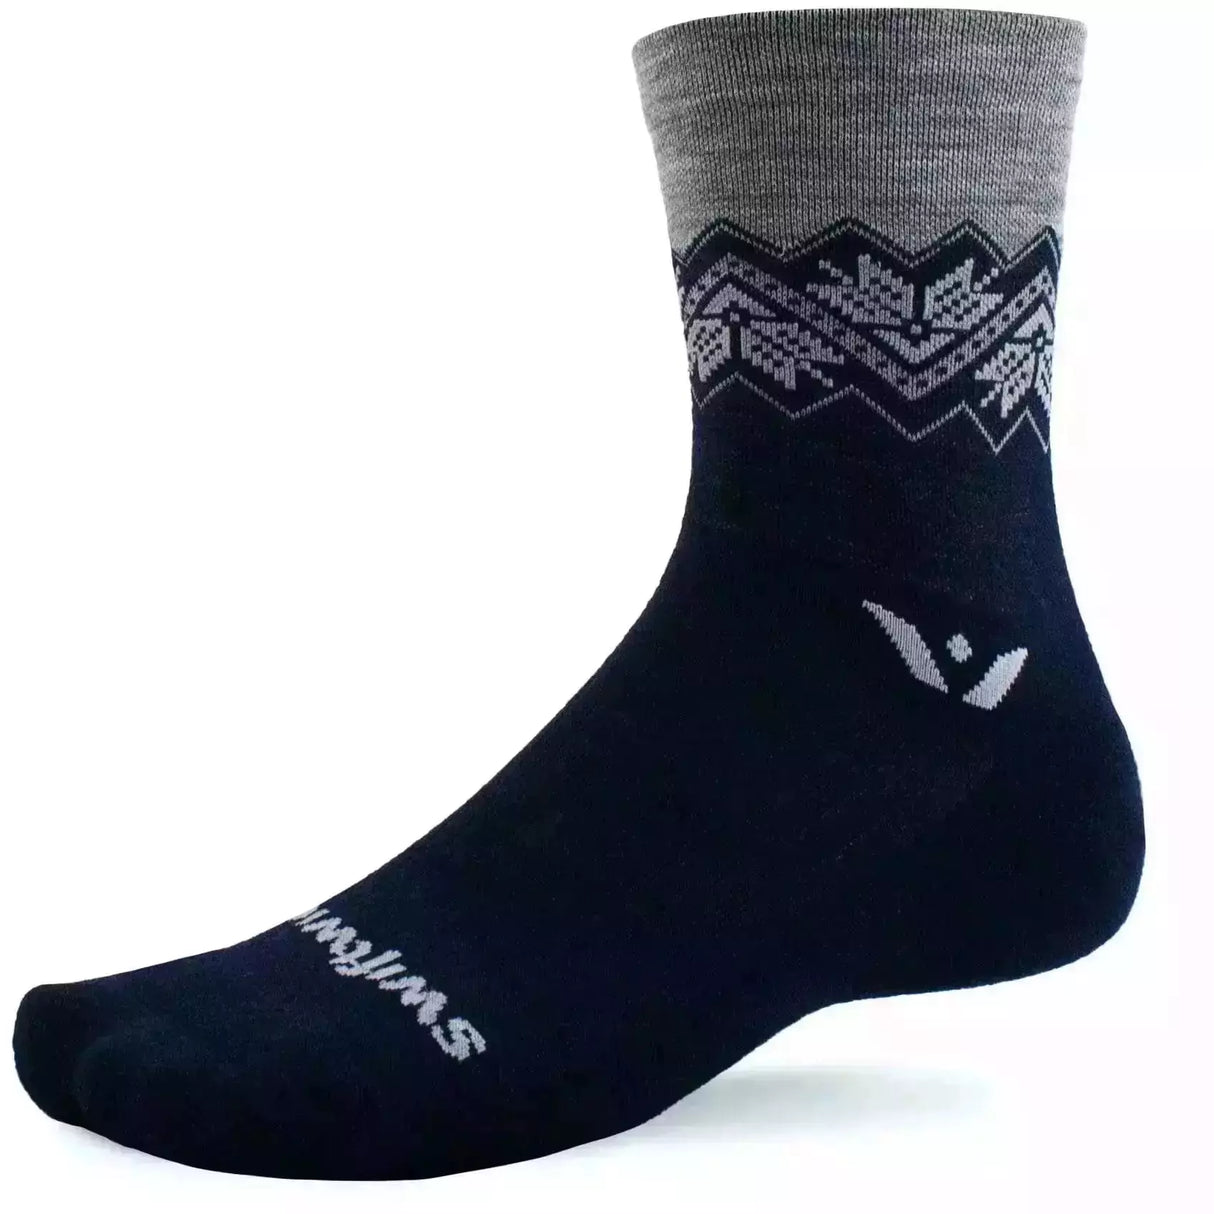 Swiftwick Vision Five Winter Limited Edition Crew Socks  -  Large / Fair Isle Navy